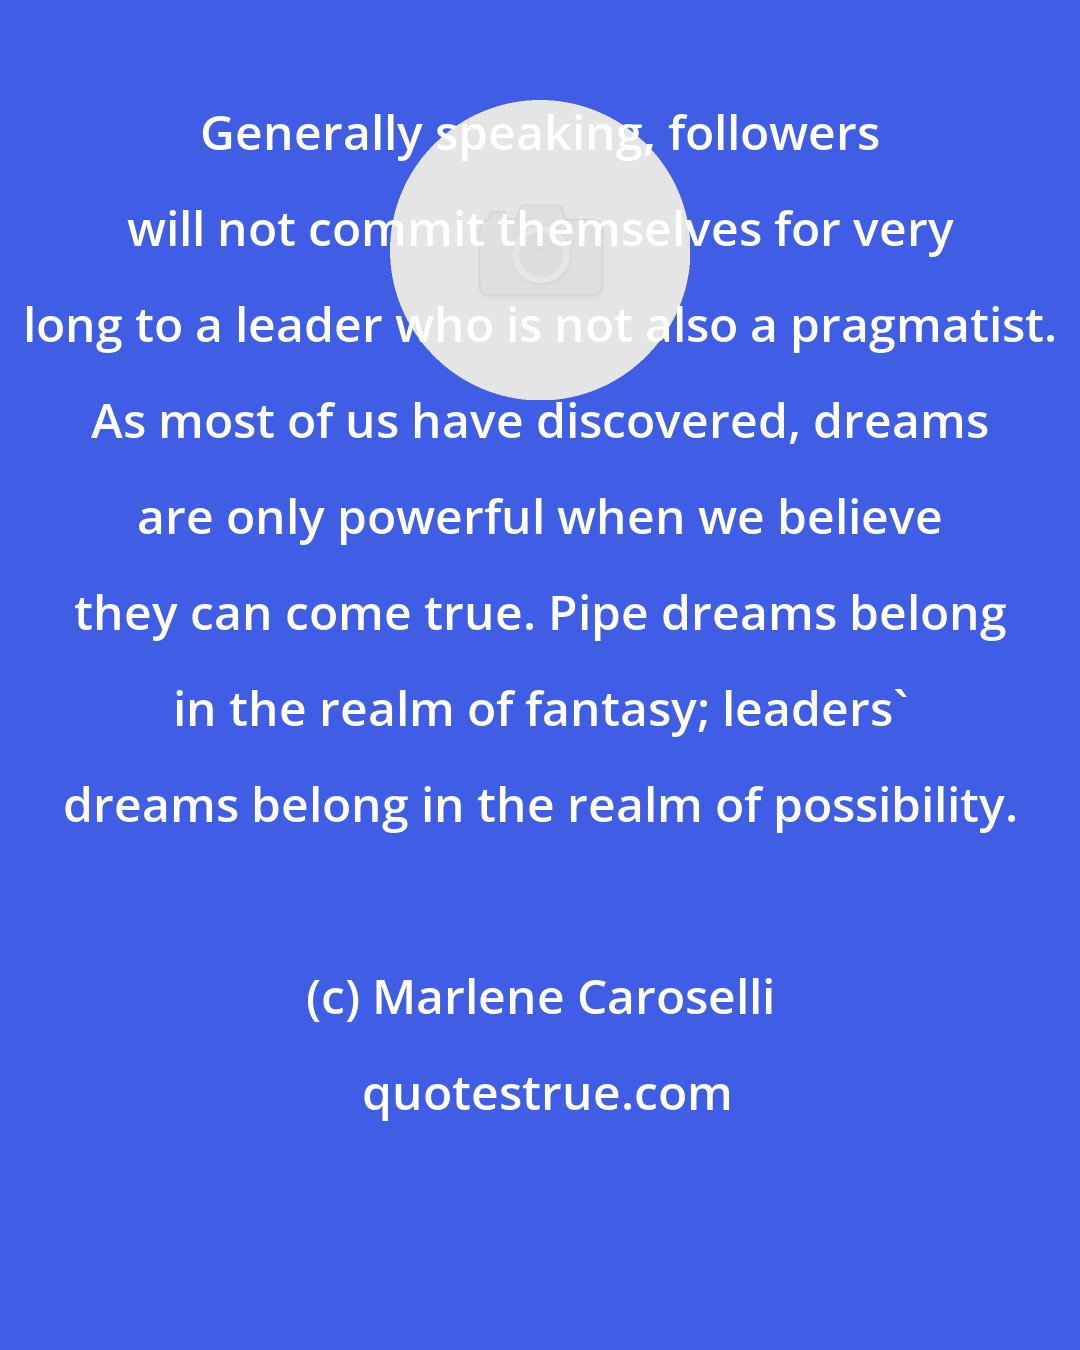 Marlene Caroselli: Generally speaking, followers will not commit themselves for very long to a leader who is not also a pragmatist. As most of us have discovered, dreams are only powerful when we believe they can come true. Pipe dreams belong in the realm of fantasy; leaders' dreams belong in the realm of possibility.